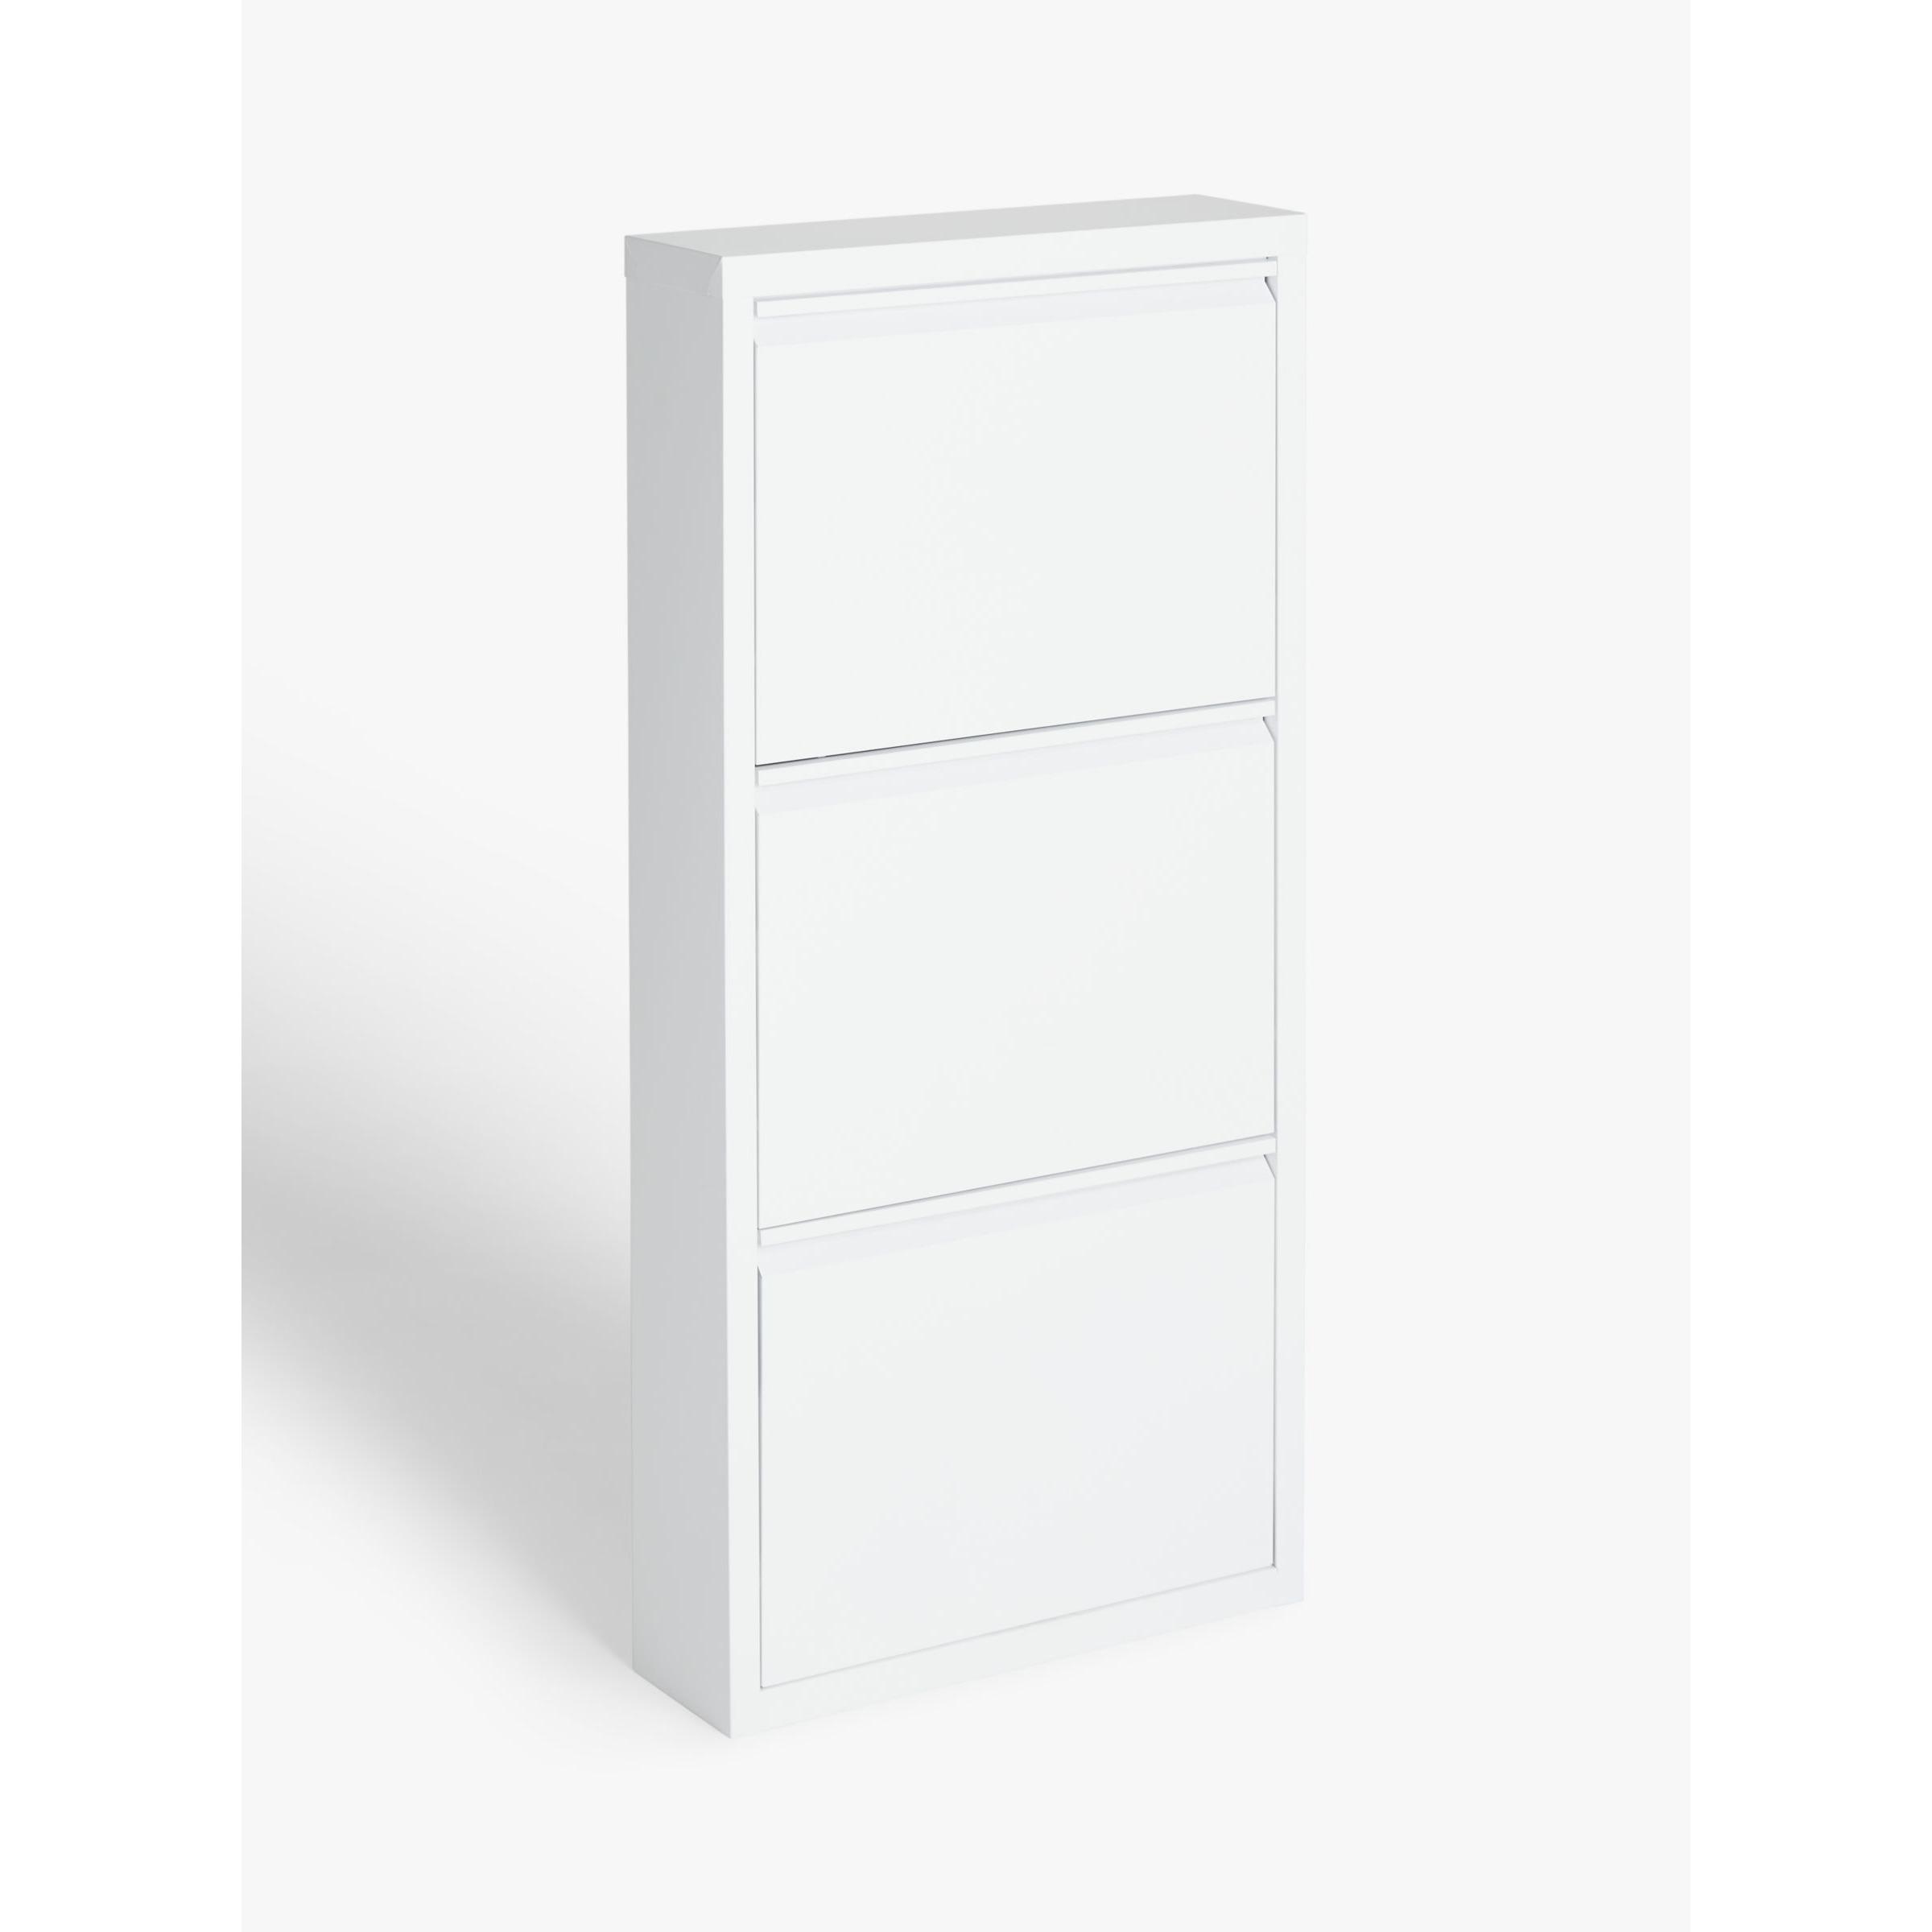 John Lewis ANYDAY Fold Out 3 Tier Shoe Rack - image 1